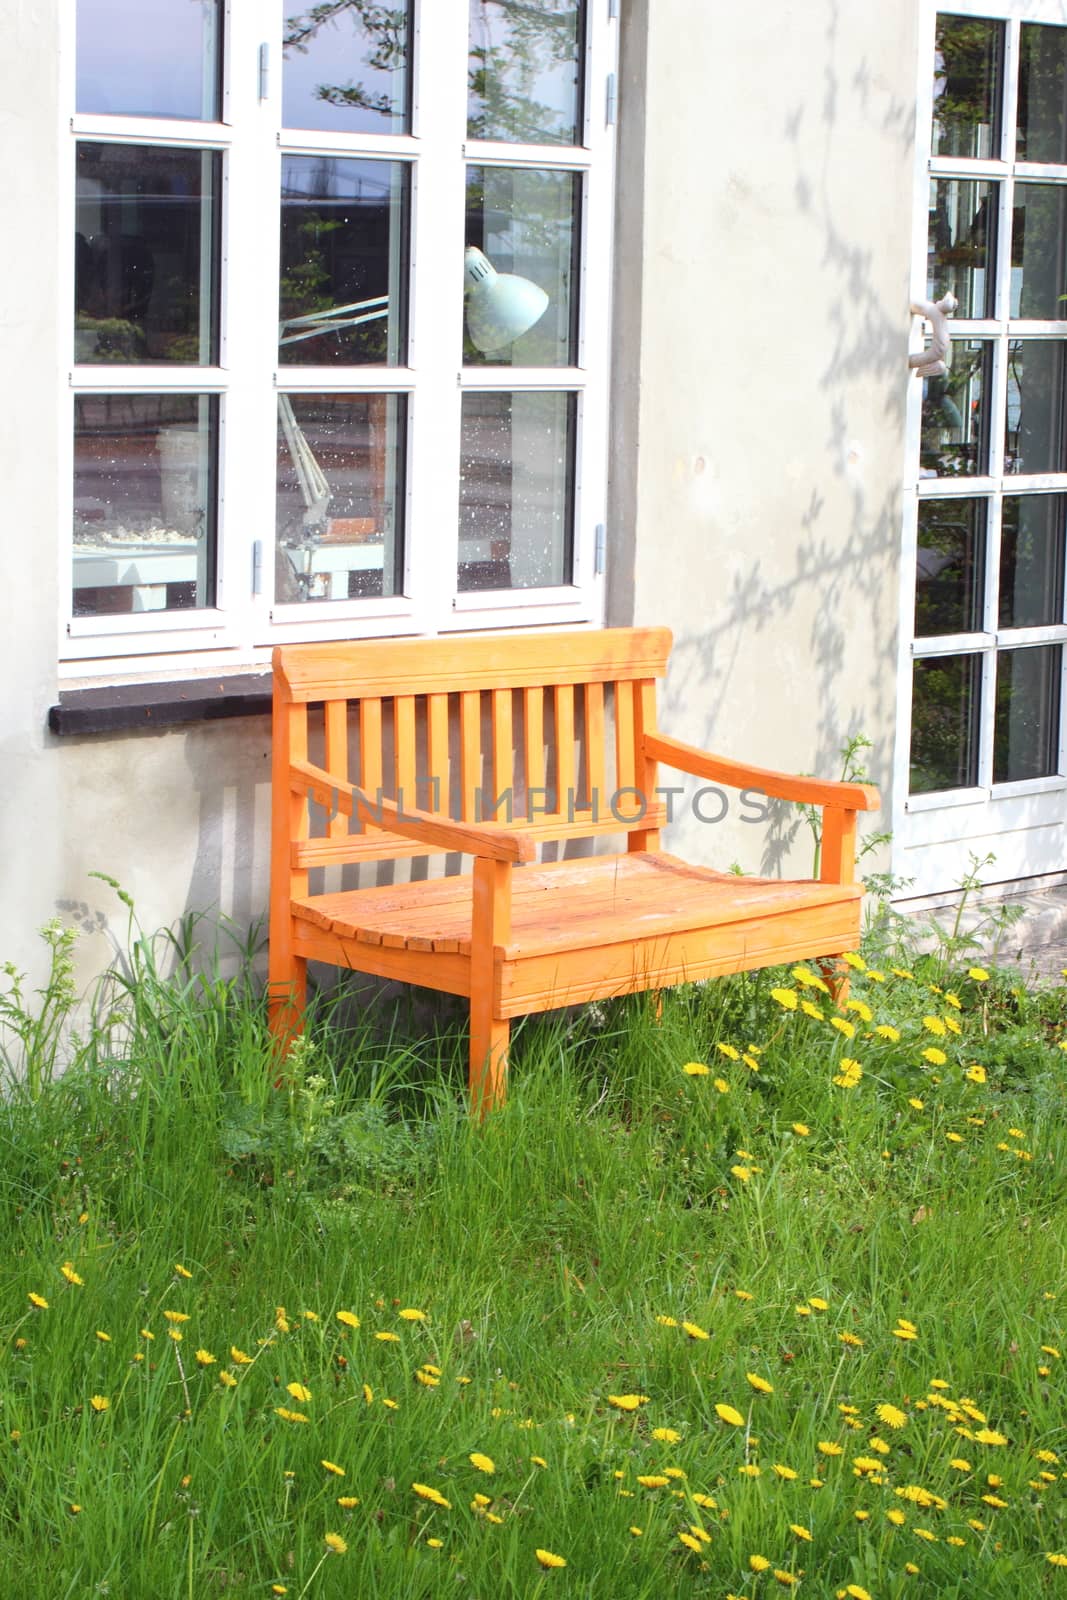 Orange bench on grass with window and lamp in background